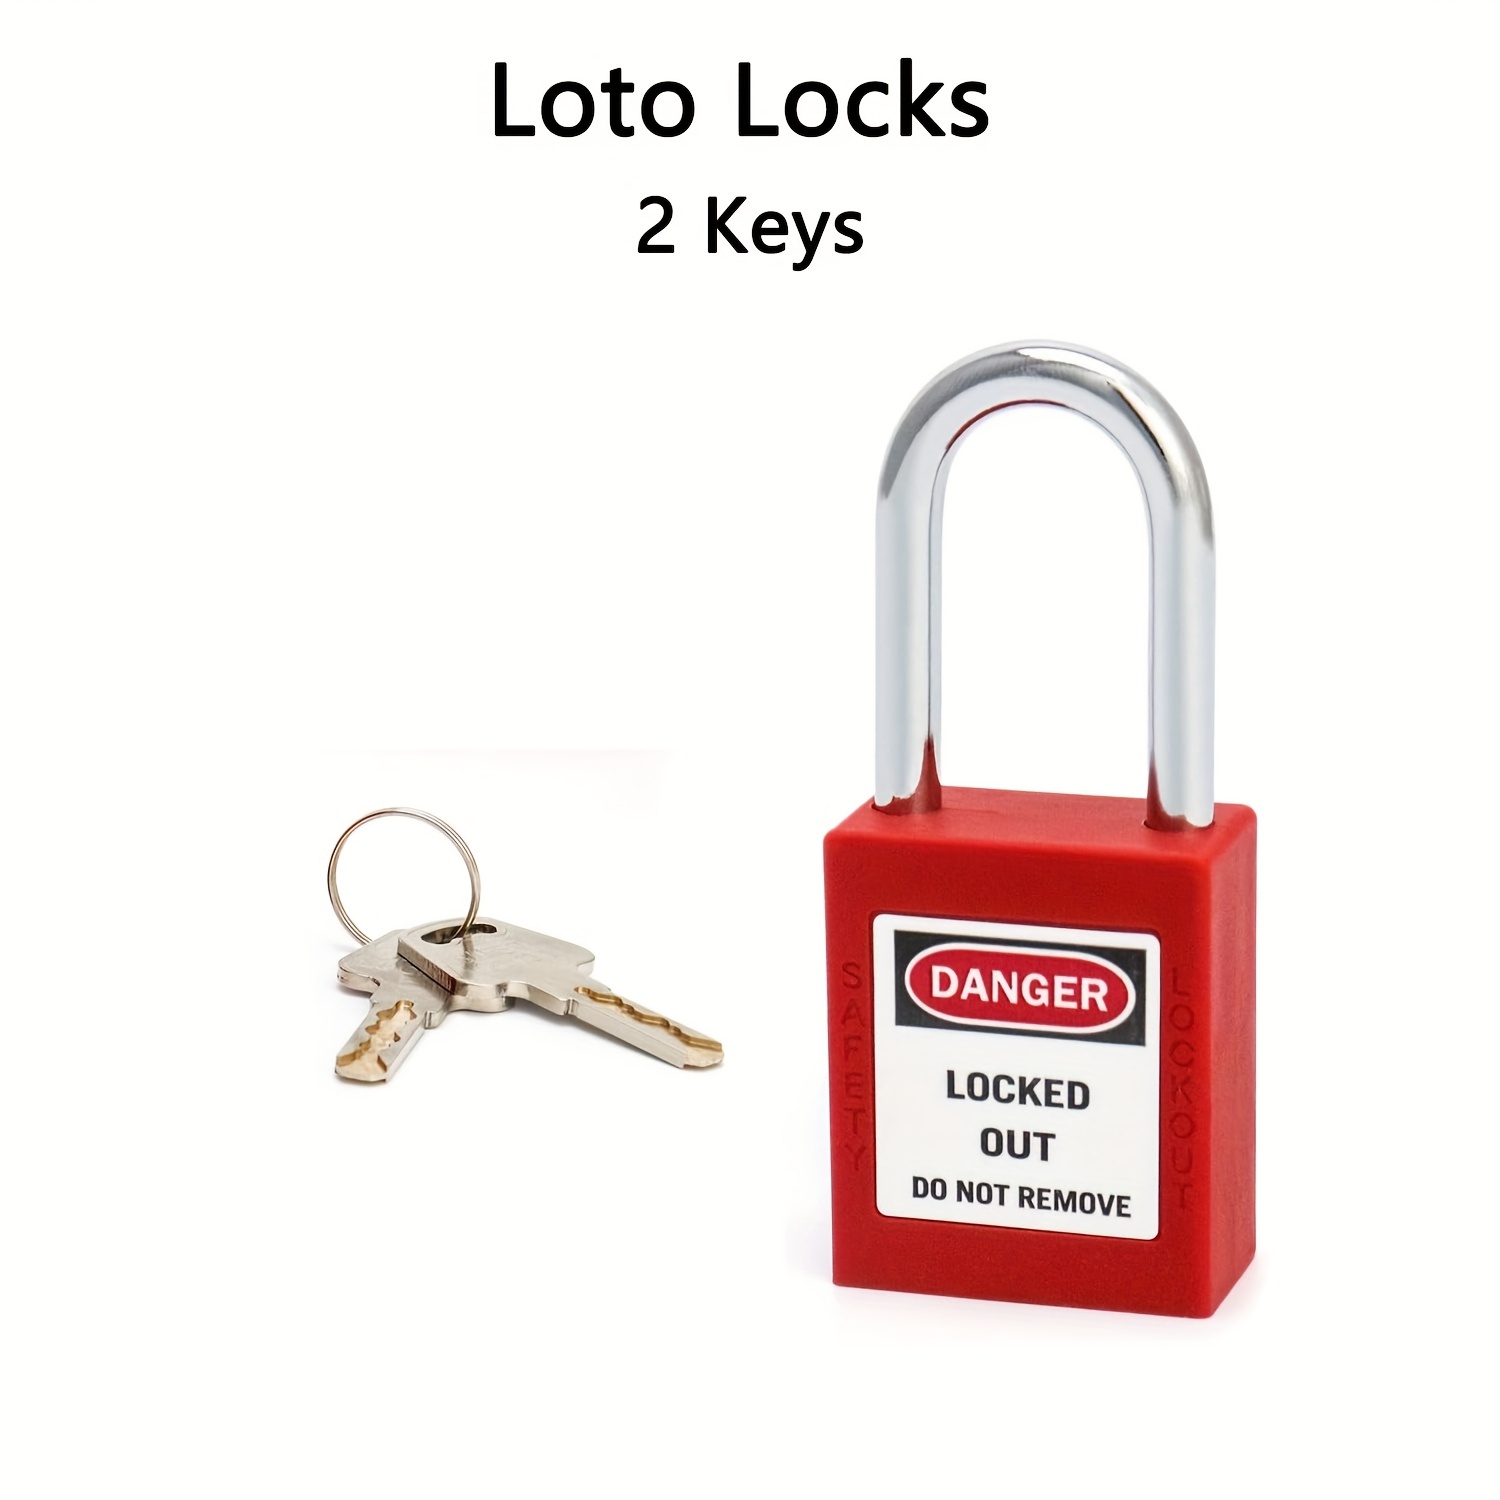 

Red Loto Locks, Lockout Locks Keyed Different, 2 Keys Per Lock, Osha Compliant Lock Out Tag Out Padlocks, Safety Padlocks For Electrical Lockout Tag Out Kits